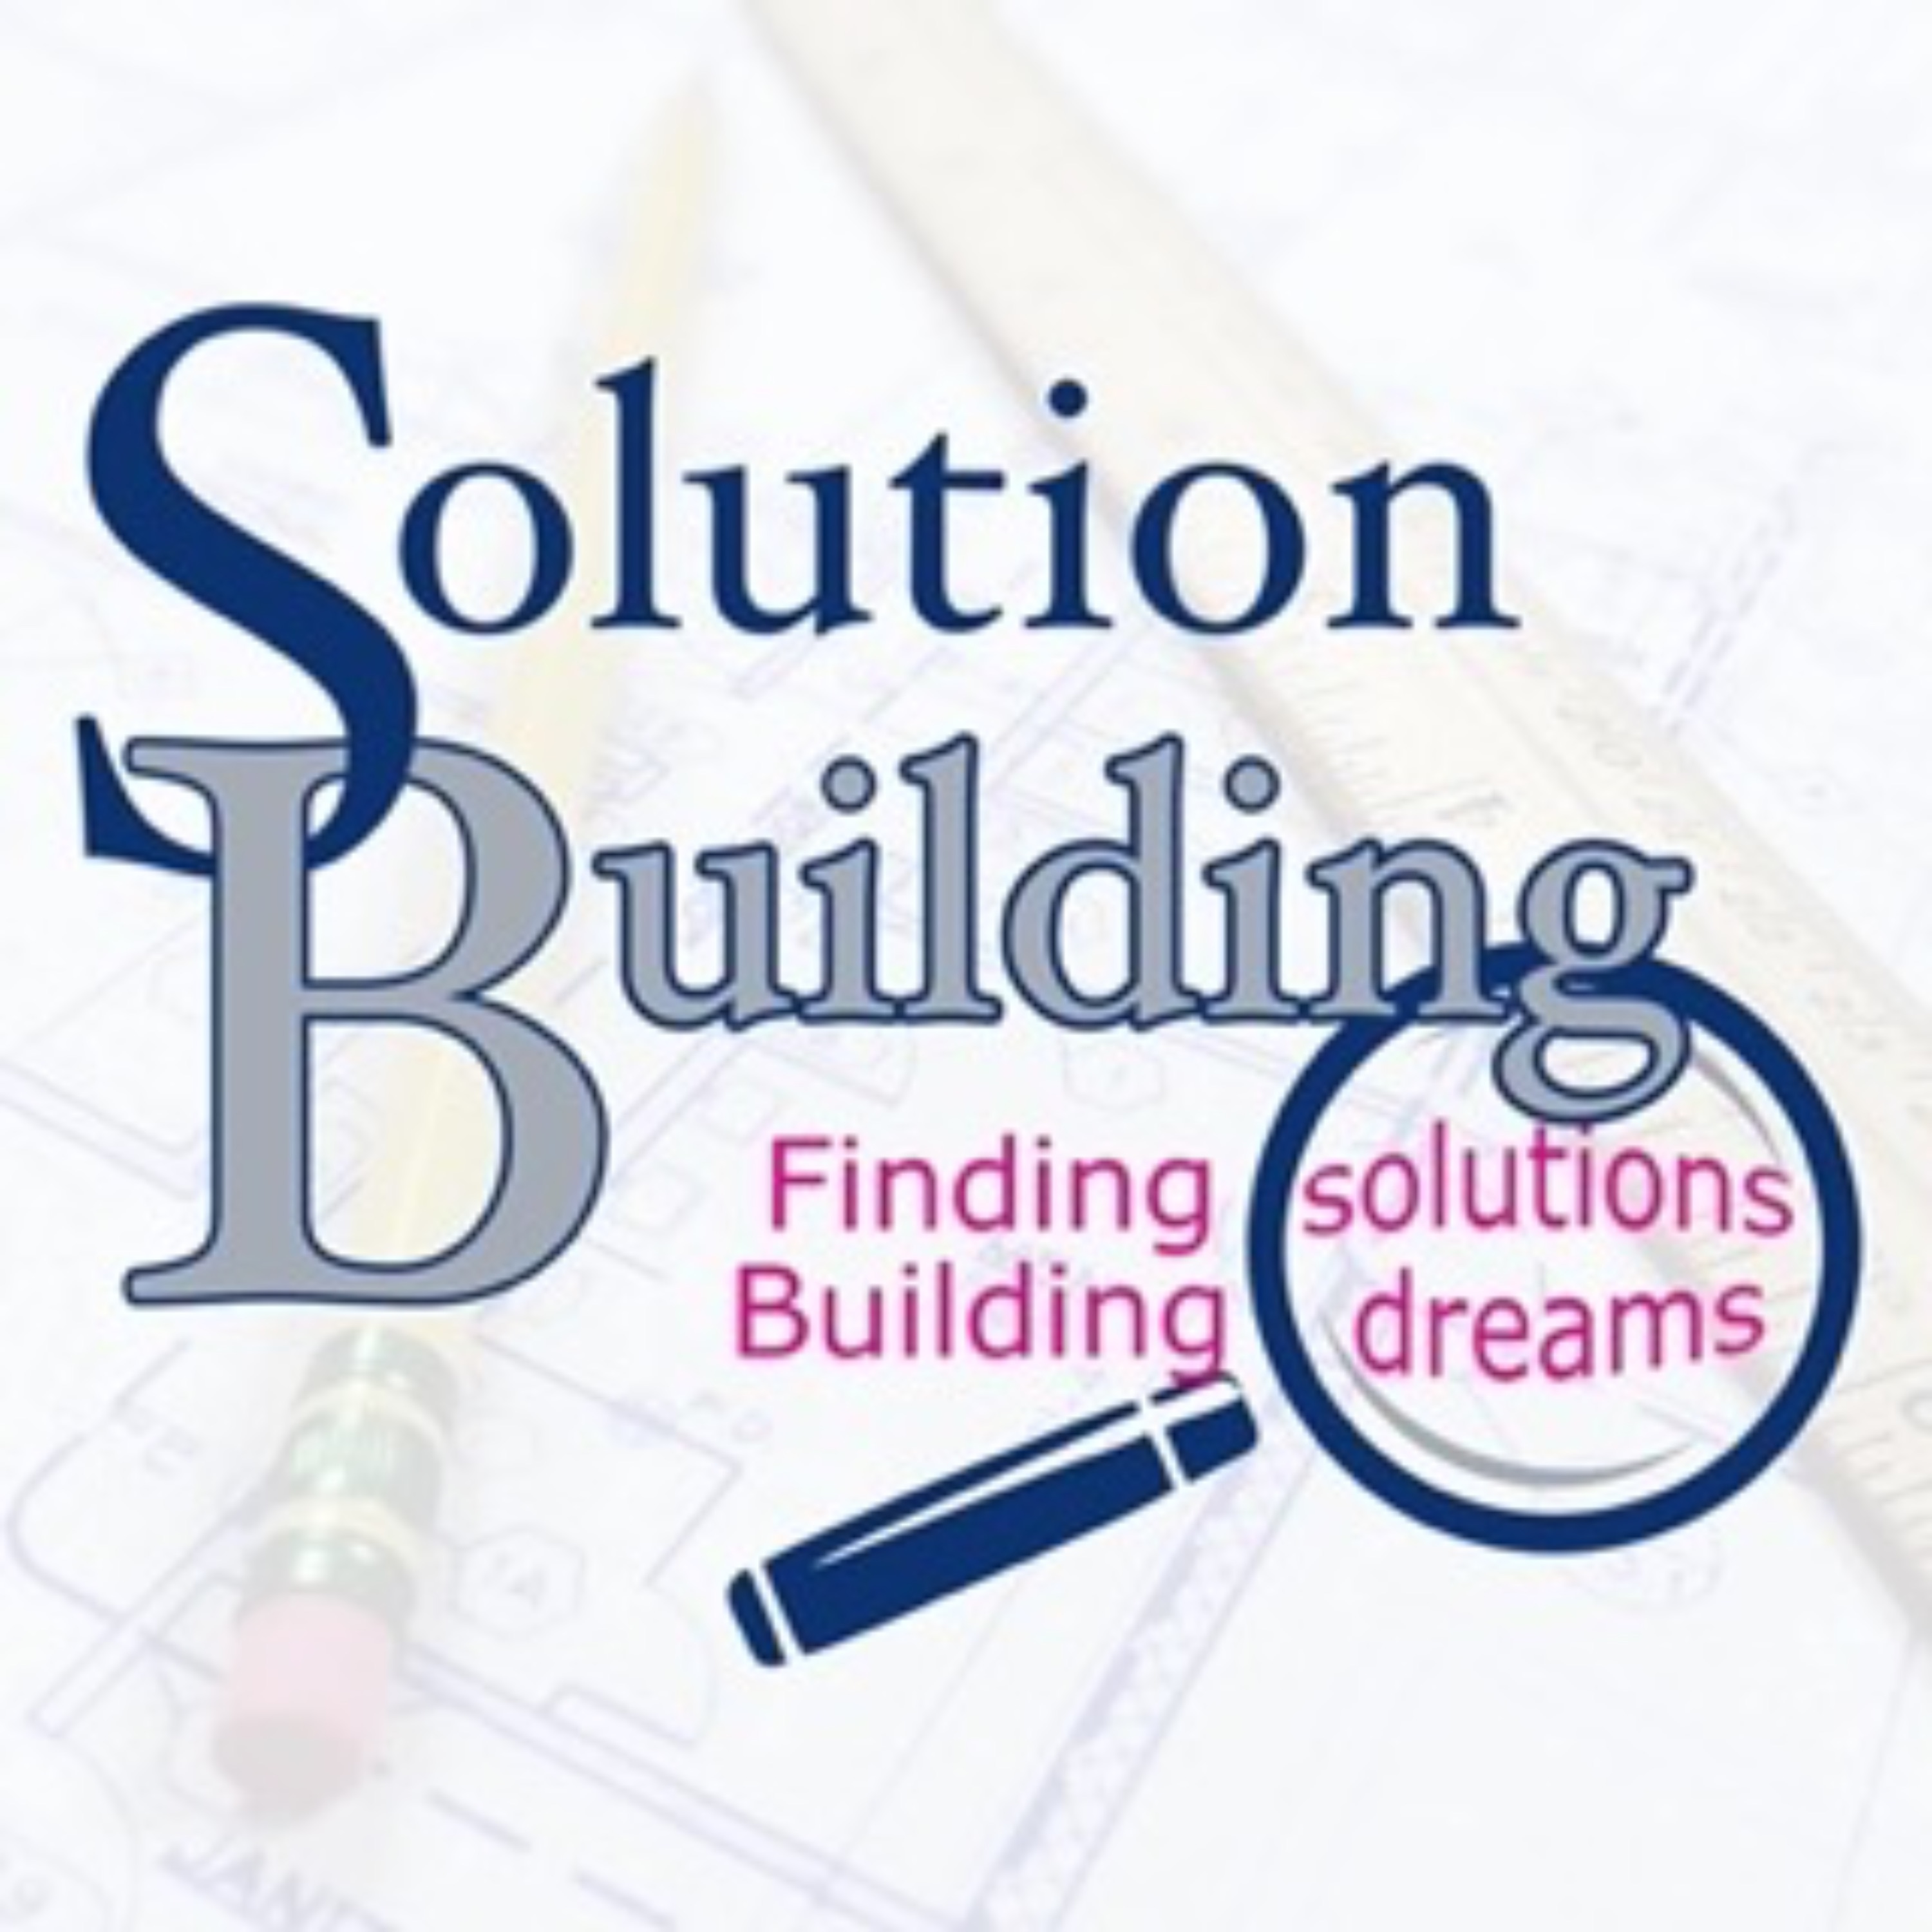 You Need the Right INFORMATION to BUILD the Construction Company of Your Dreams